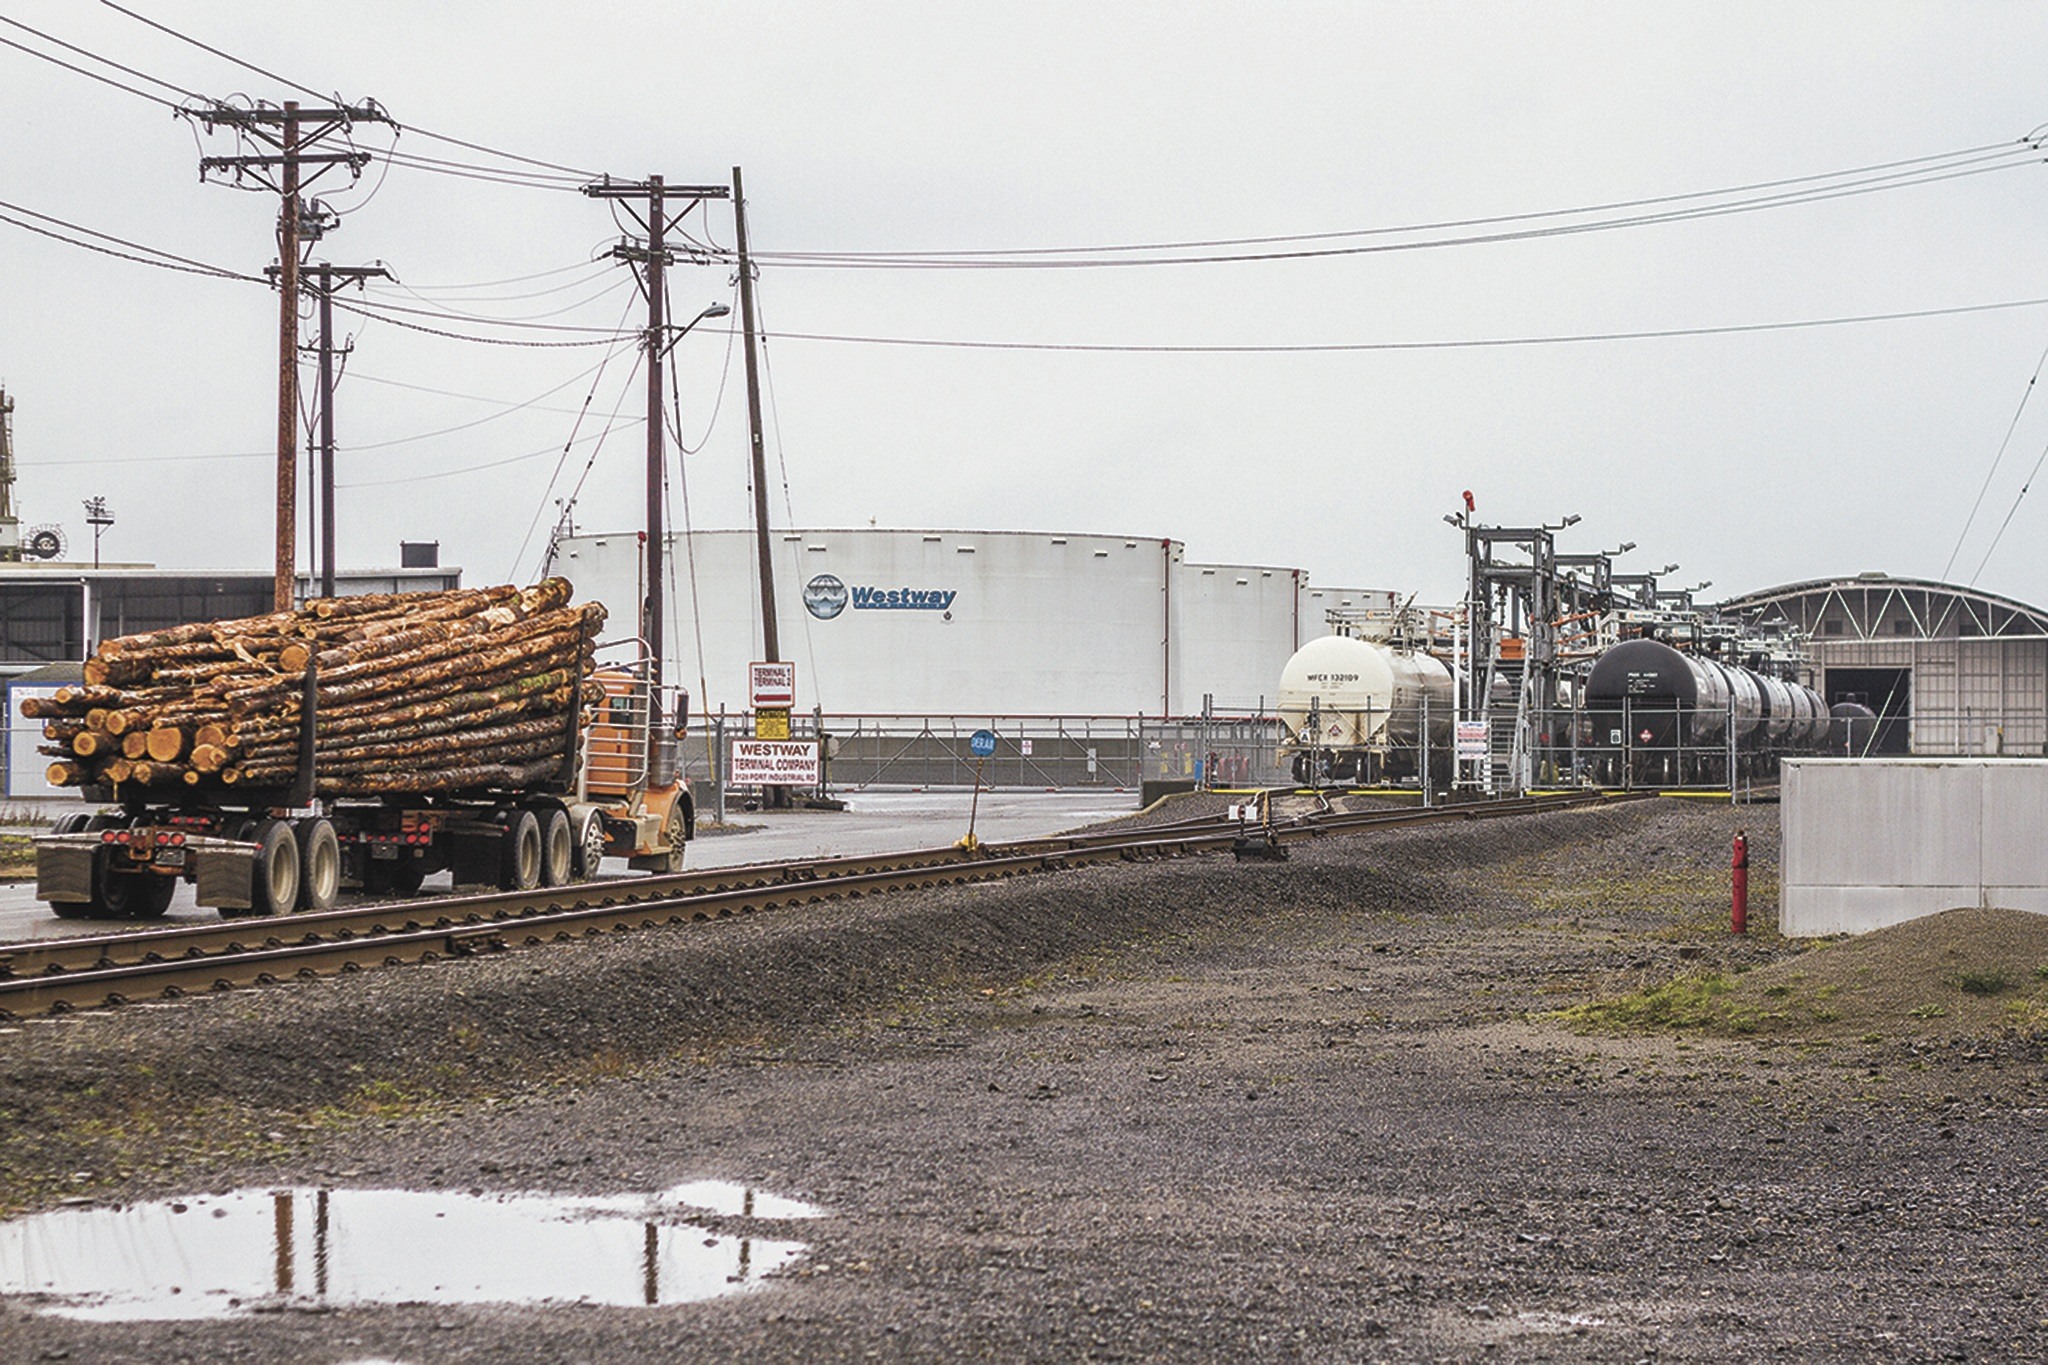 (File photo | The Daily World) Rail cars line up inside the entrance of Westway Terminals’ Port of Grays Harbor property last December. The company is interested in expanding its facility to handle crude oil shipments.